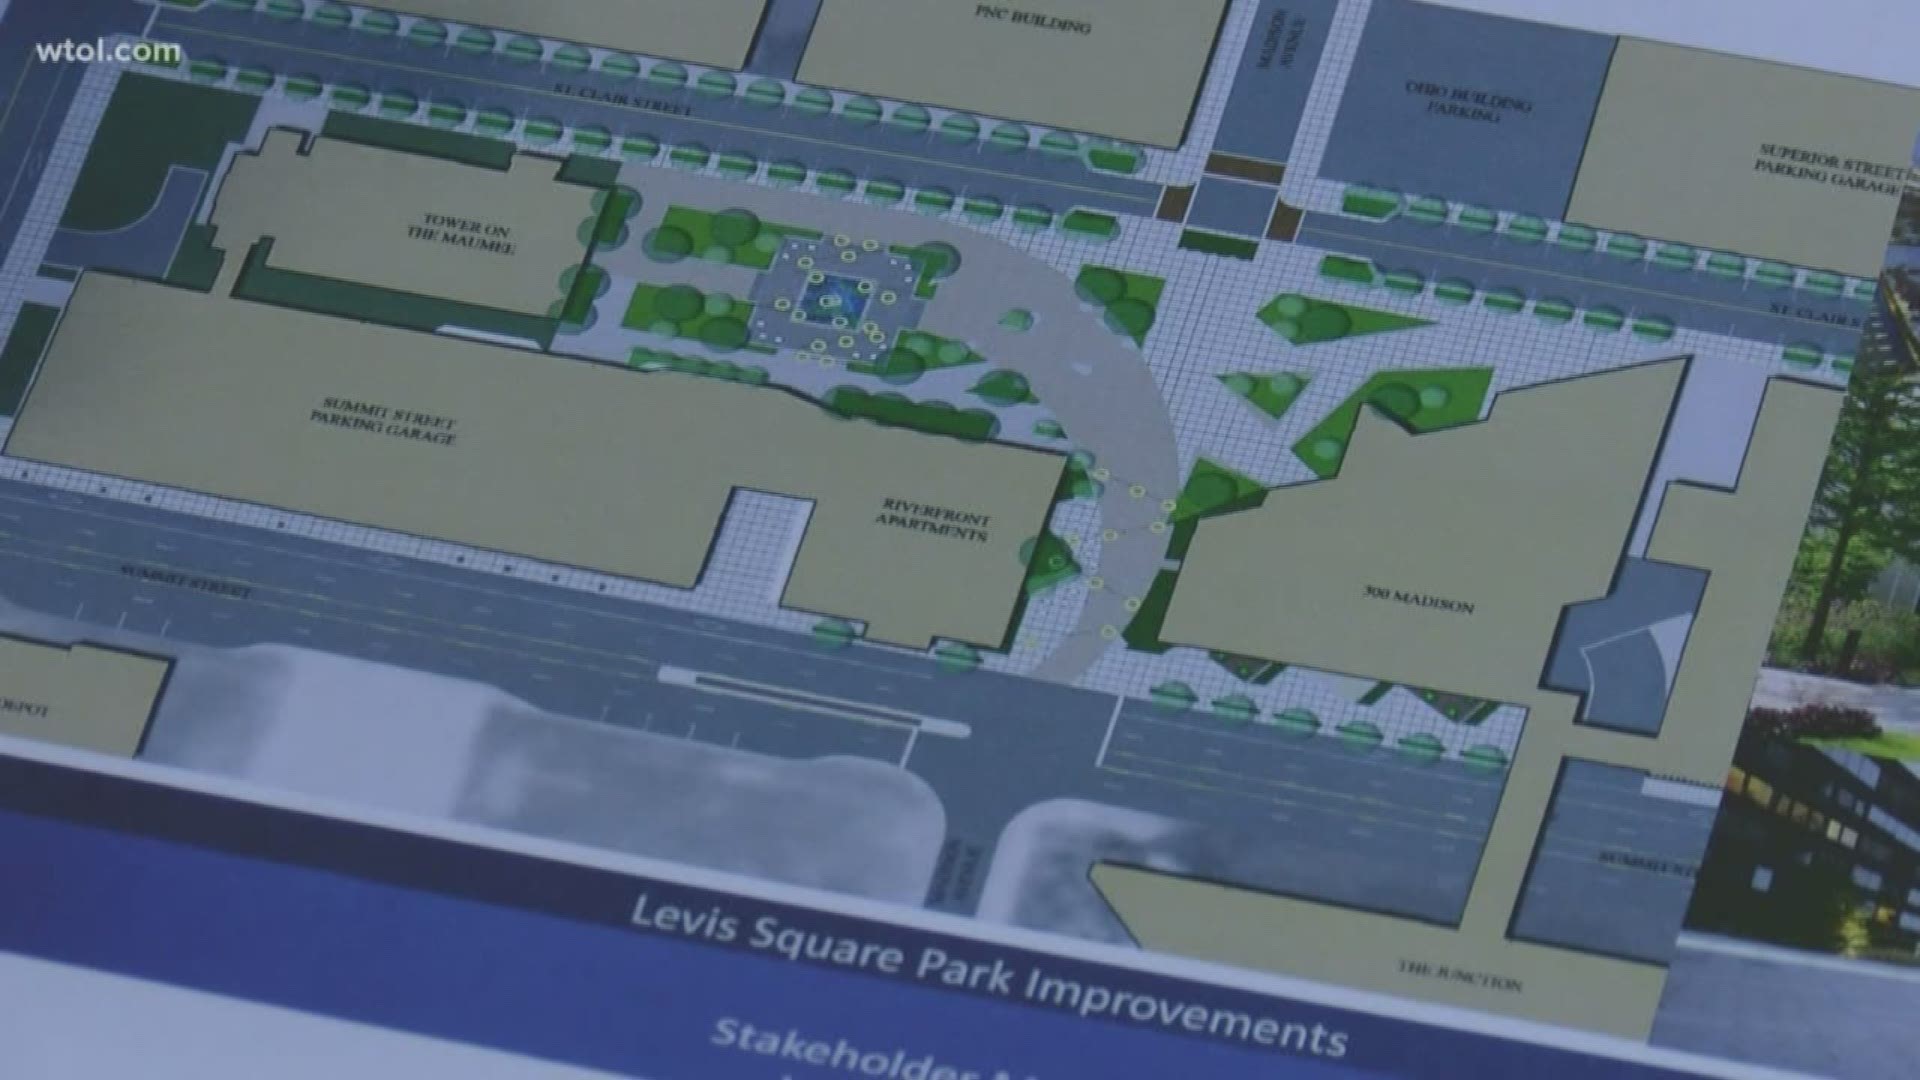 The total bill to reconstruct Levis Square by 2021 is estimated at nearly $1.5 million. Toledo City Council will vote Tuesday on allocating $400,000 of that amount.